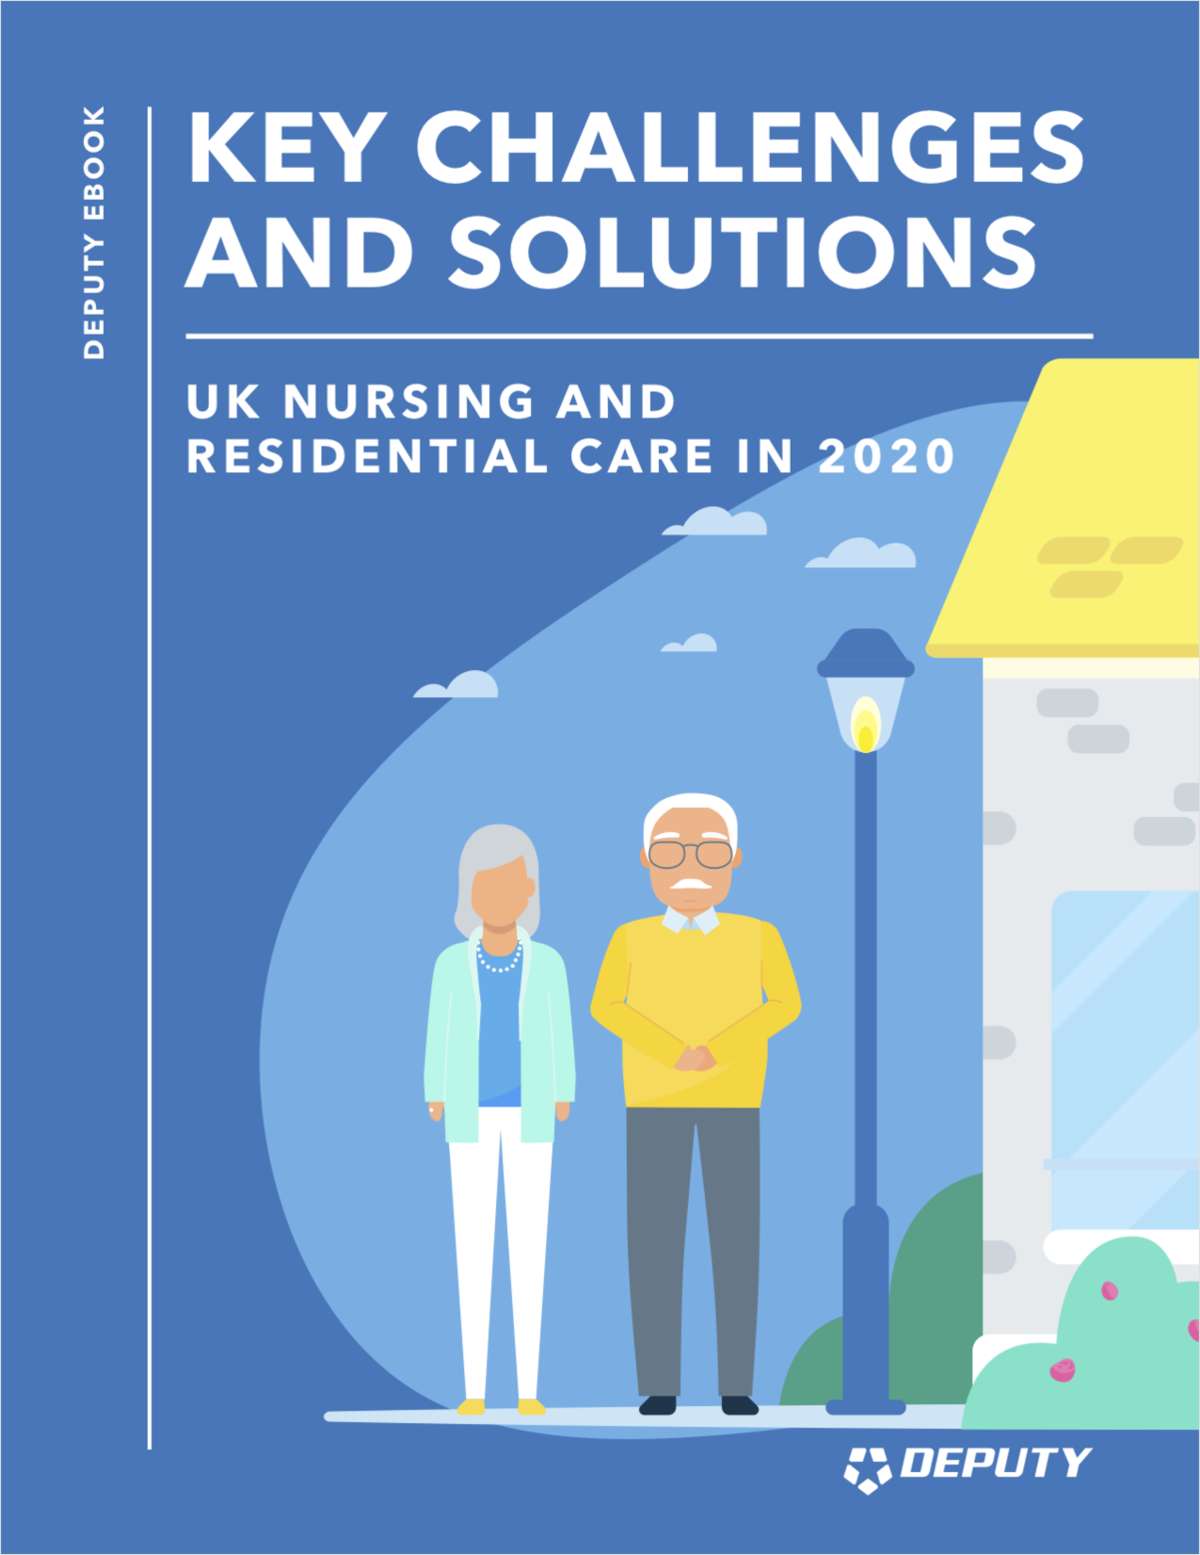 KEY CHALLENGES & SOLUTIONS   - UK Nursing and Residential Care in 2020